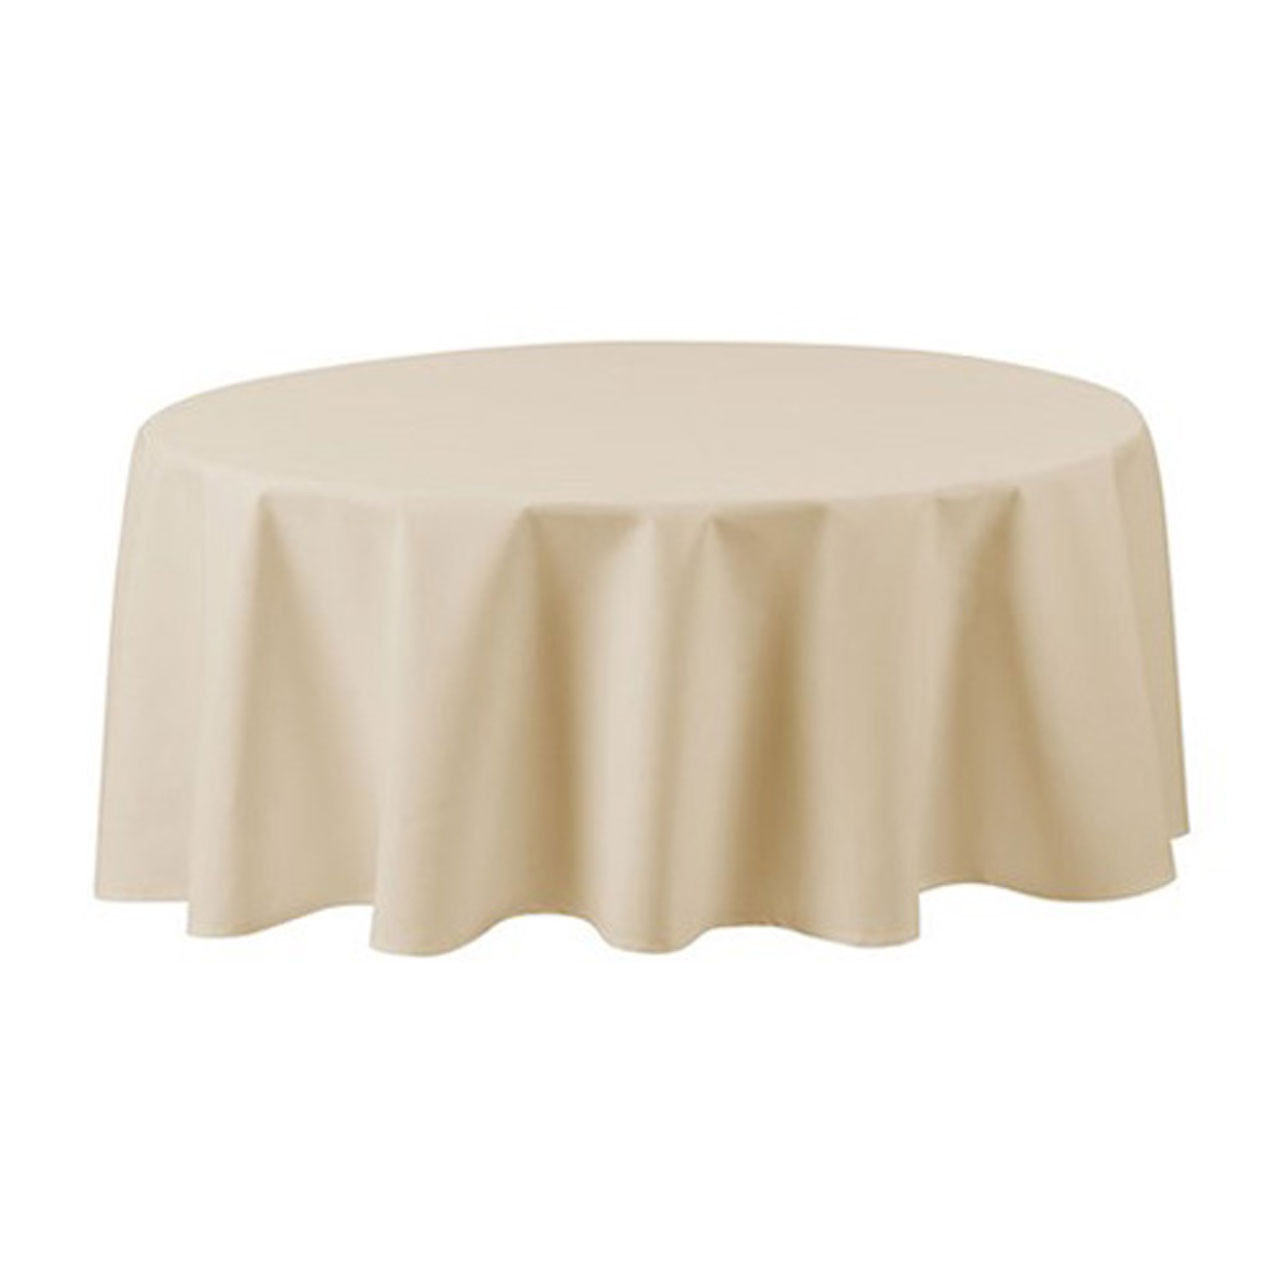 Why should restaurants consider investing in these premium round polyester tablecloths?